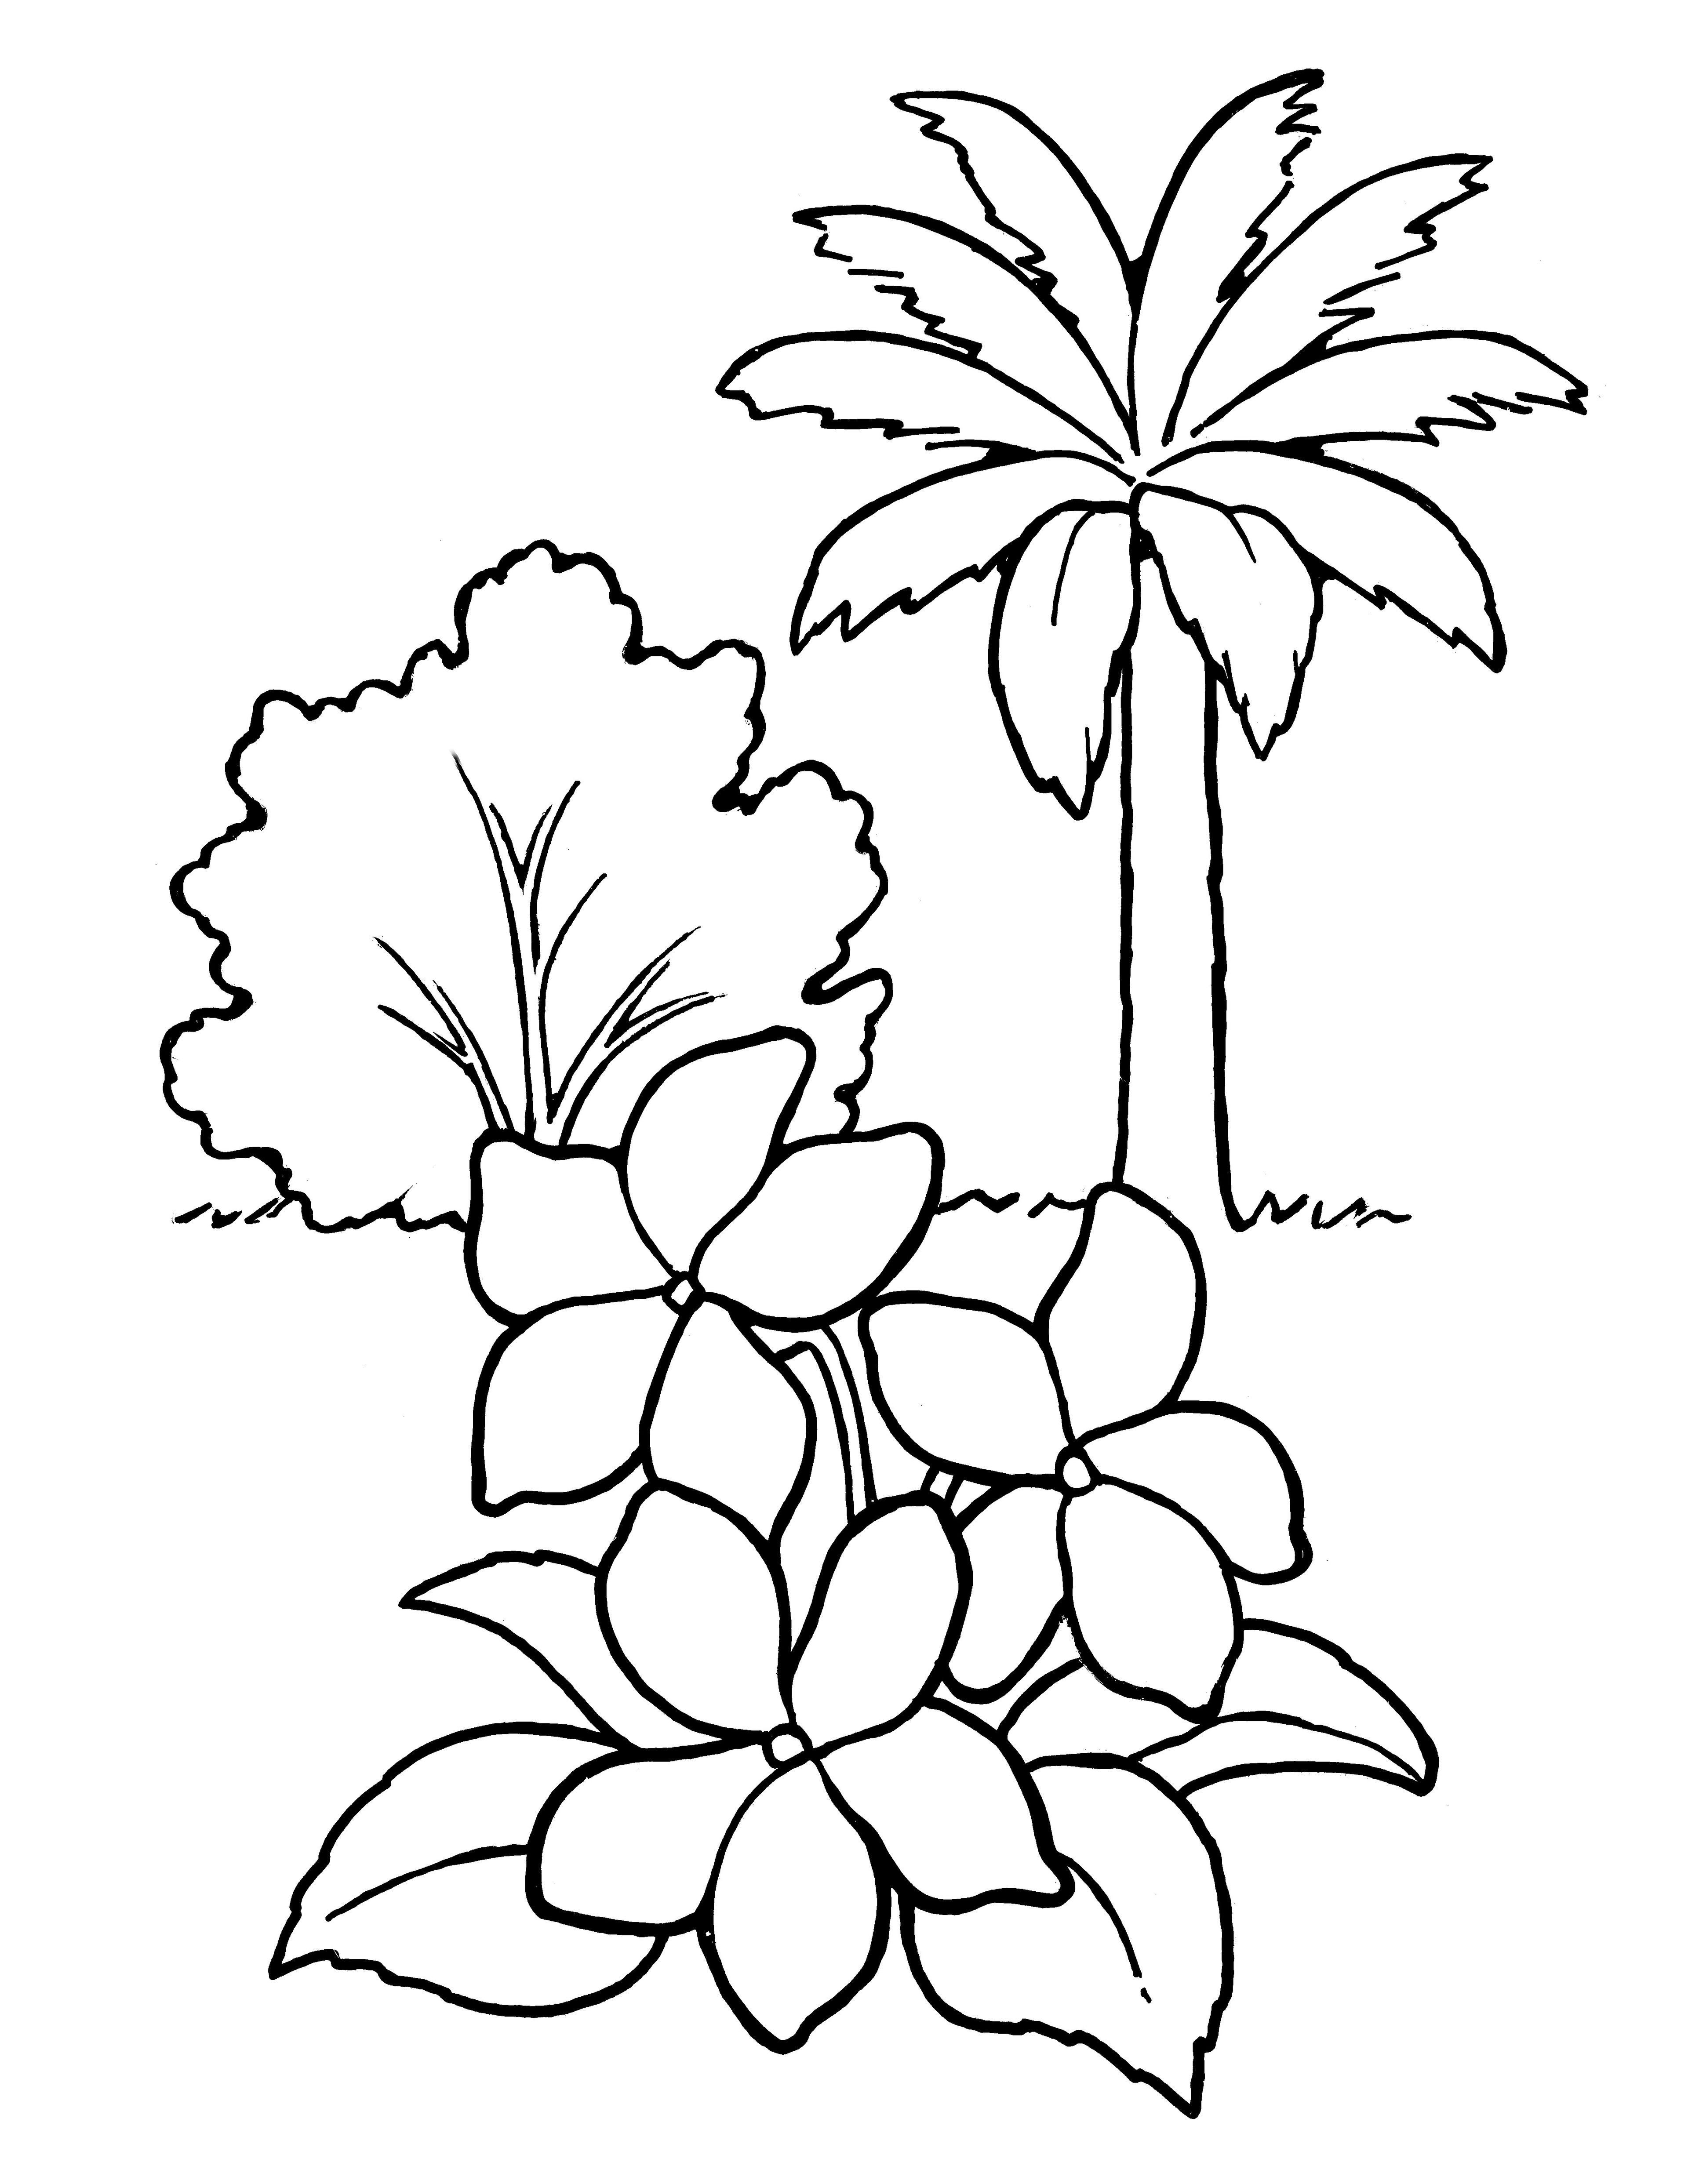 A line drawing of plants and trees from the nursery manual, Behold Your Little Ones (2008), page 35.